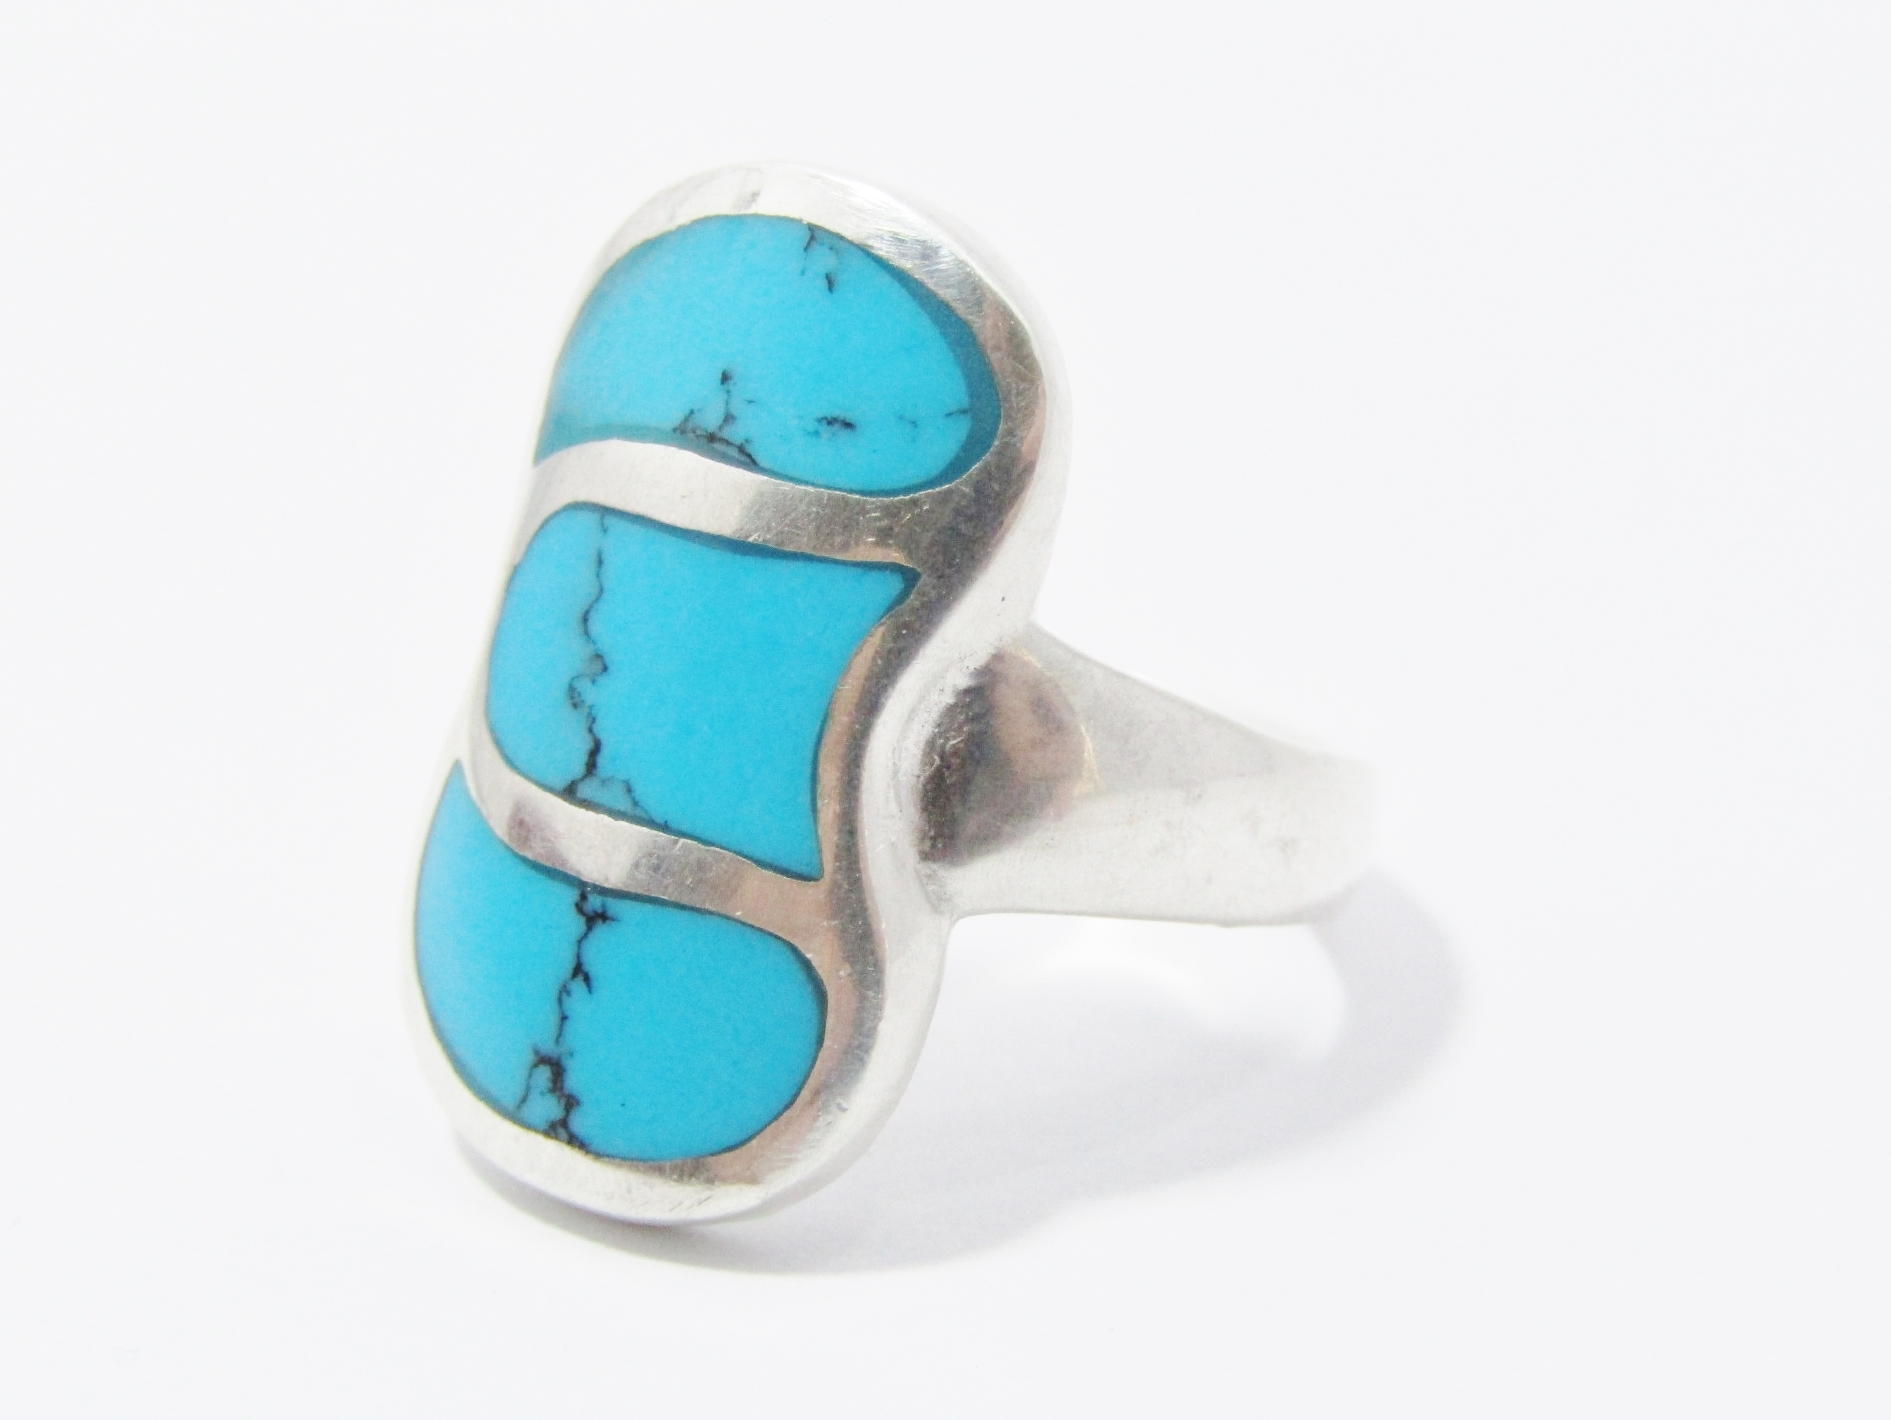 A Gorgeous Turquois Enamel Inlay Ring in Sterling Silver.